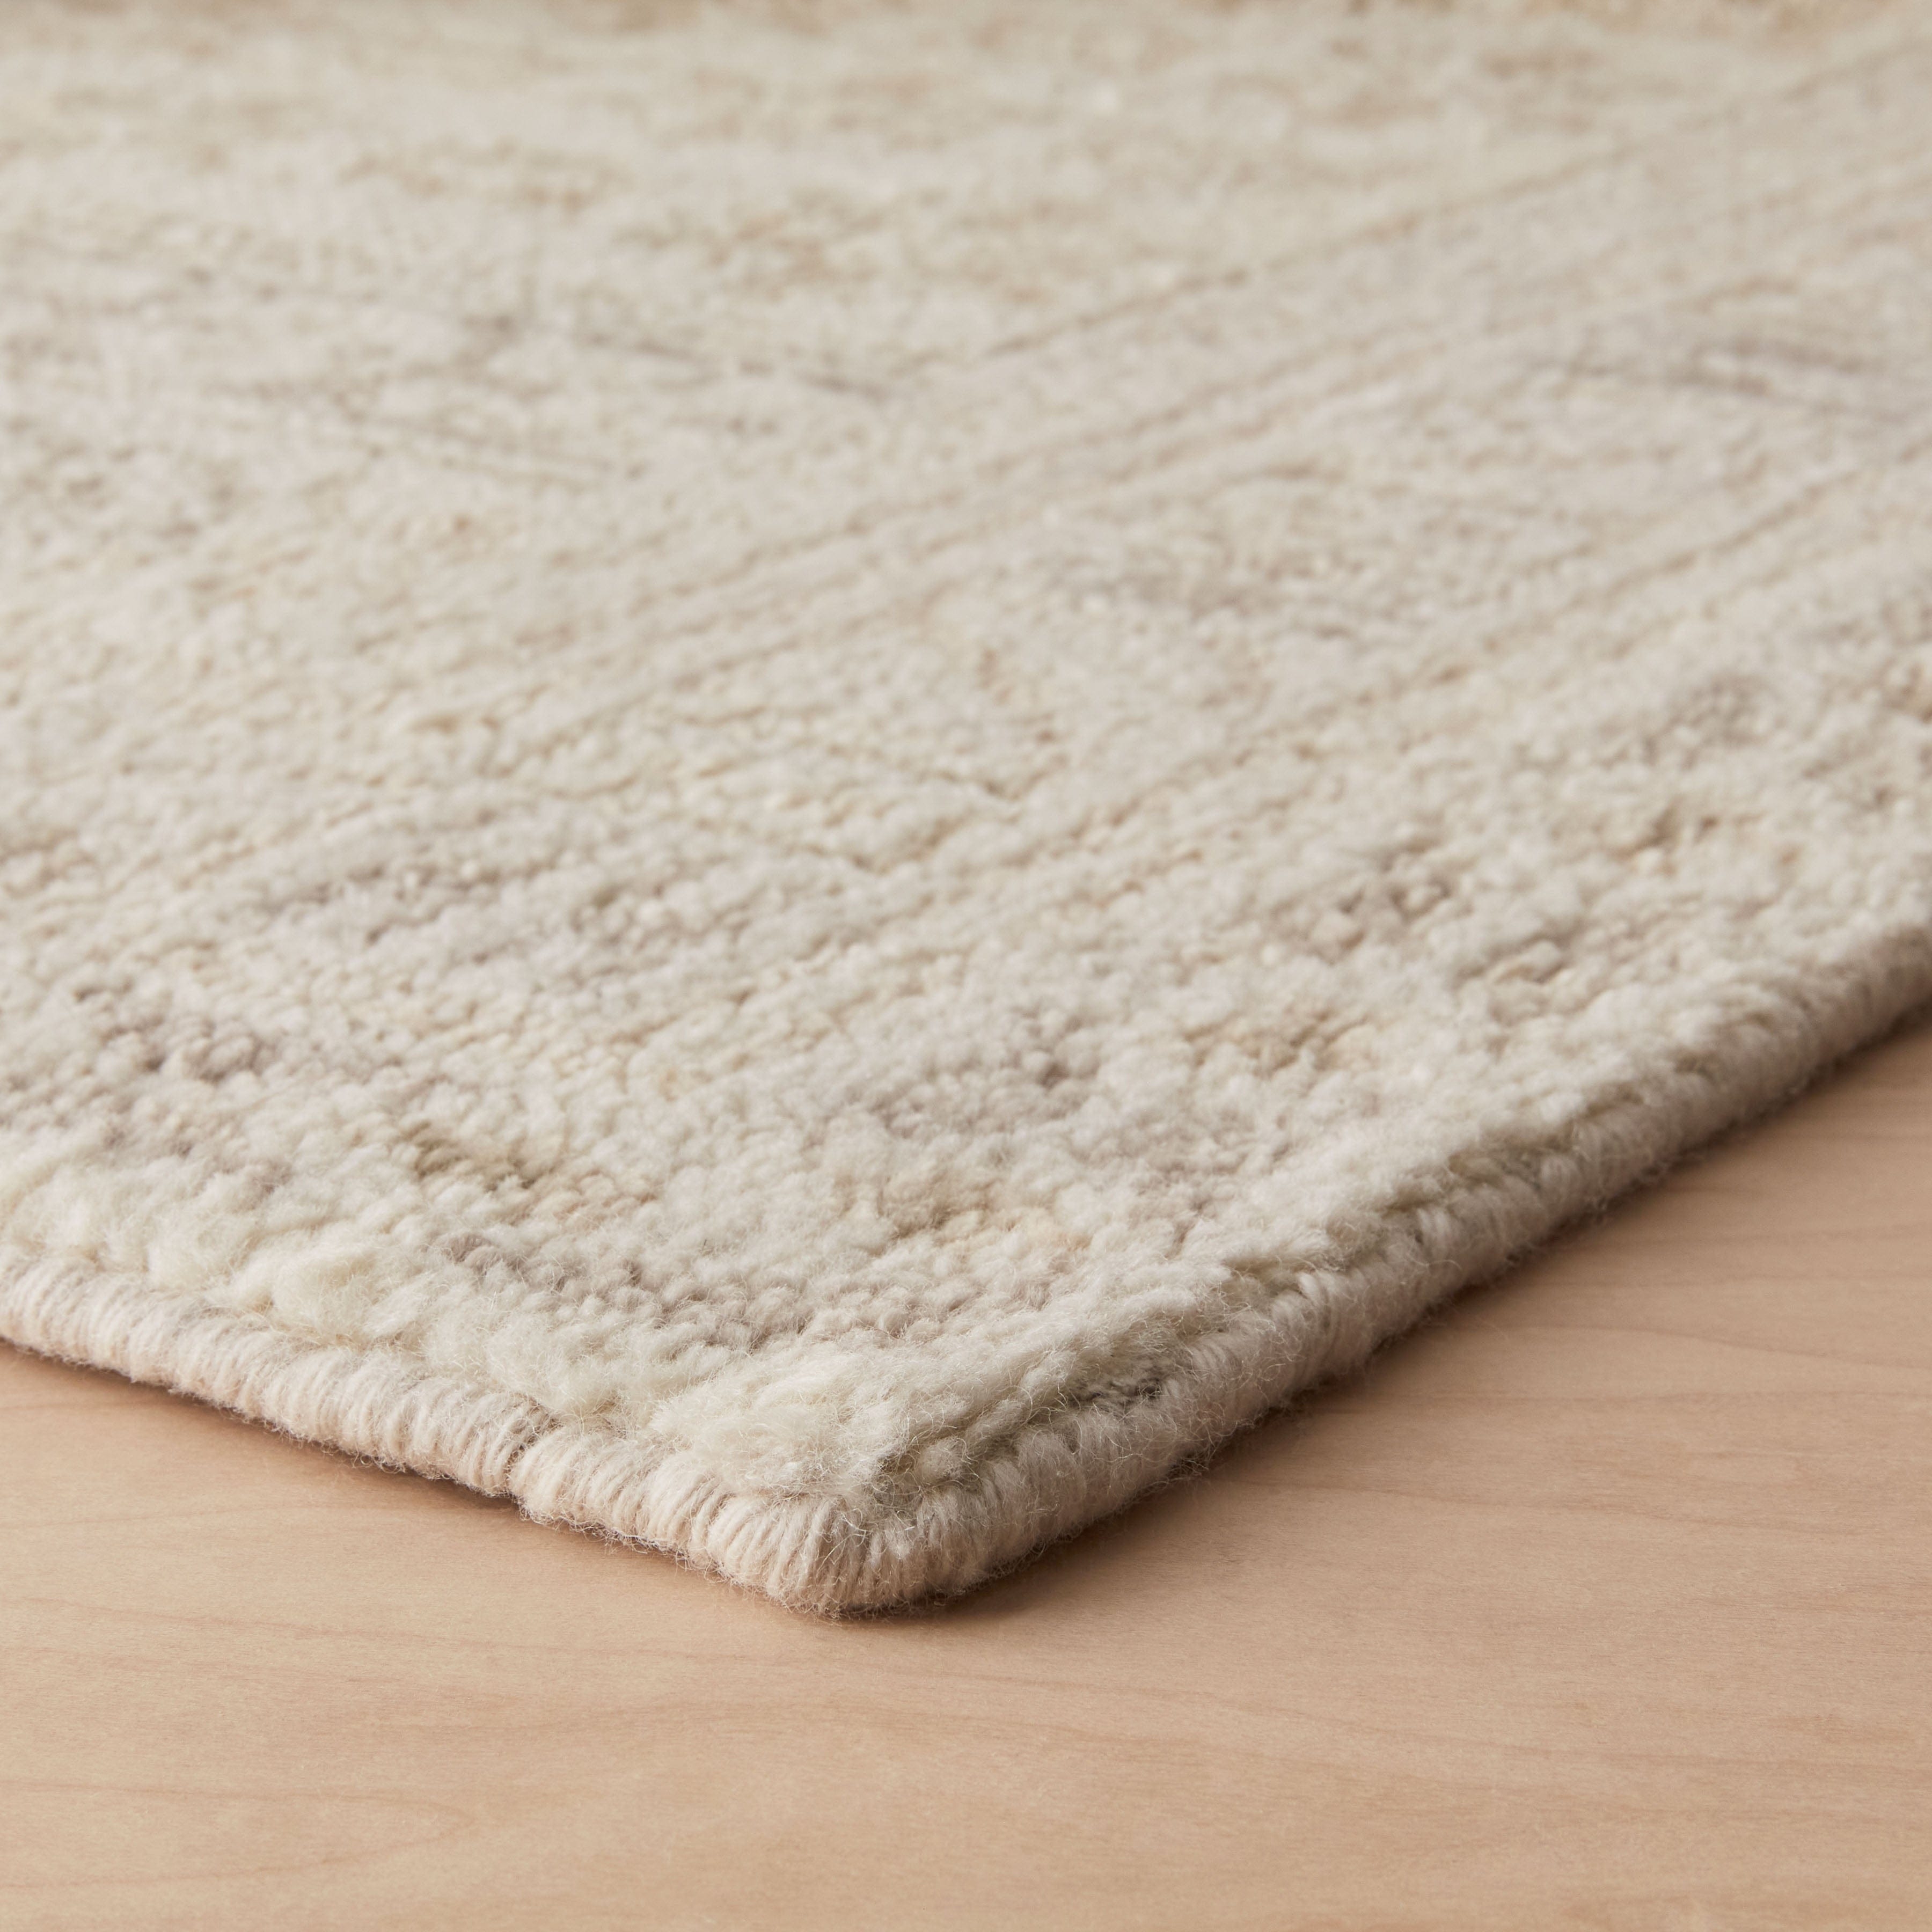 The Citizenry Lahar Hand-Knotted Accent Rug | 2' x 3' | Ecru - Image 2